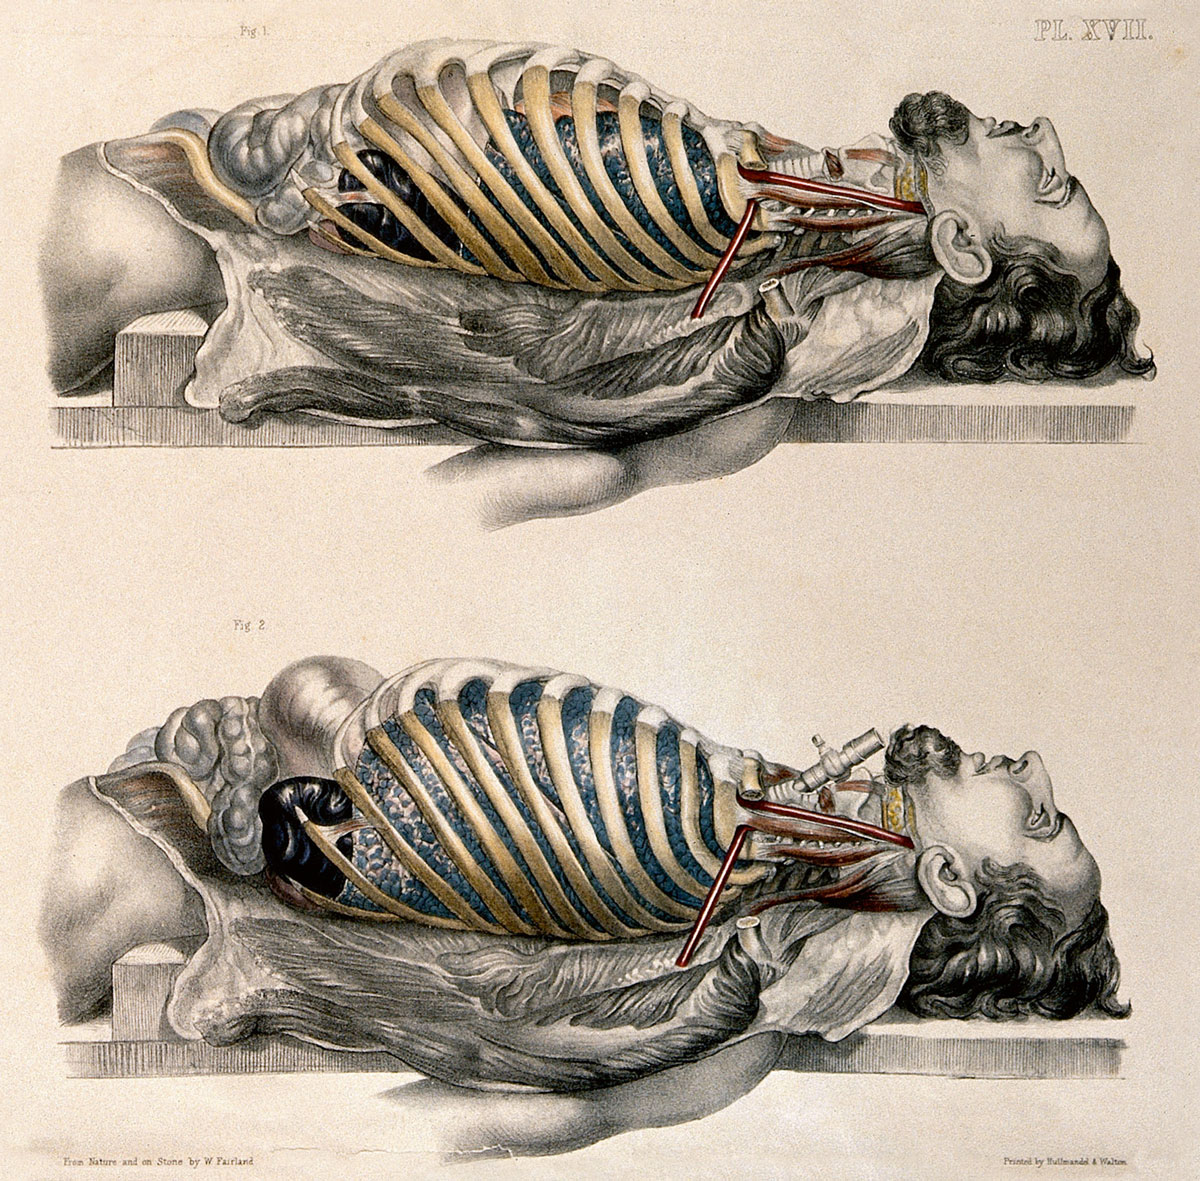 An eighteen sixty-nine lithograph by William Fairland documenting the work of anatomist Francis Sibson. The two figures show the lungs after breathing out and after breathing in. 